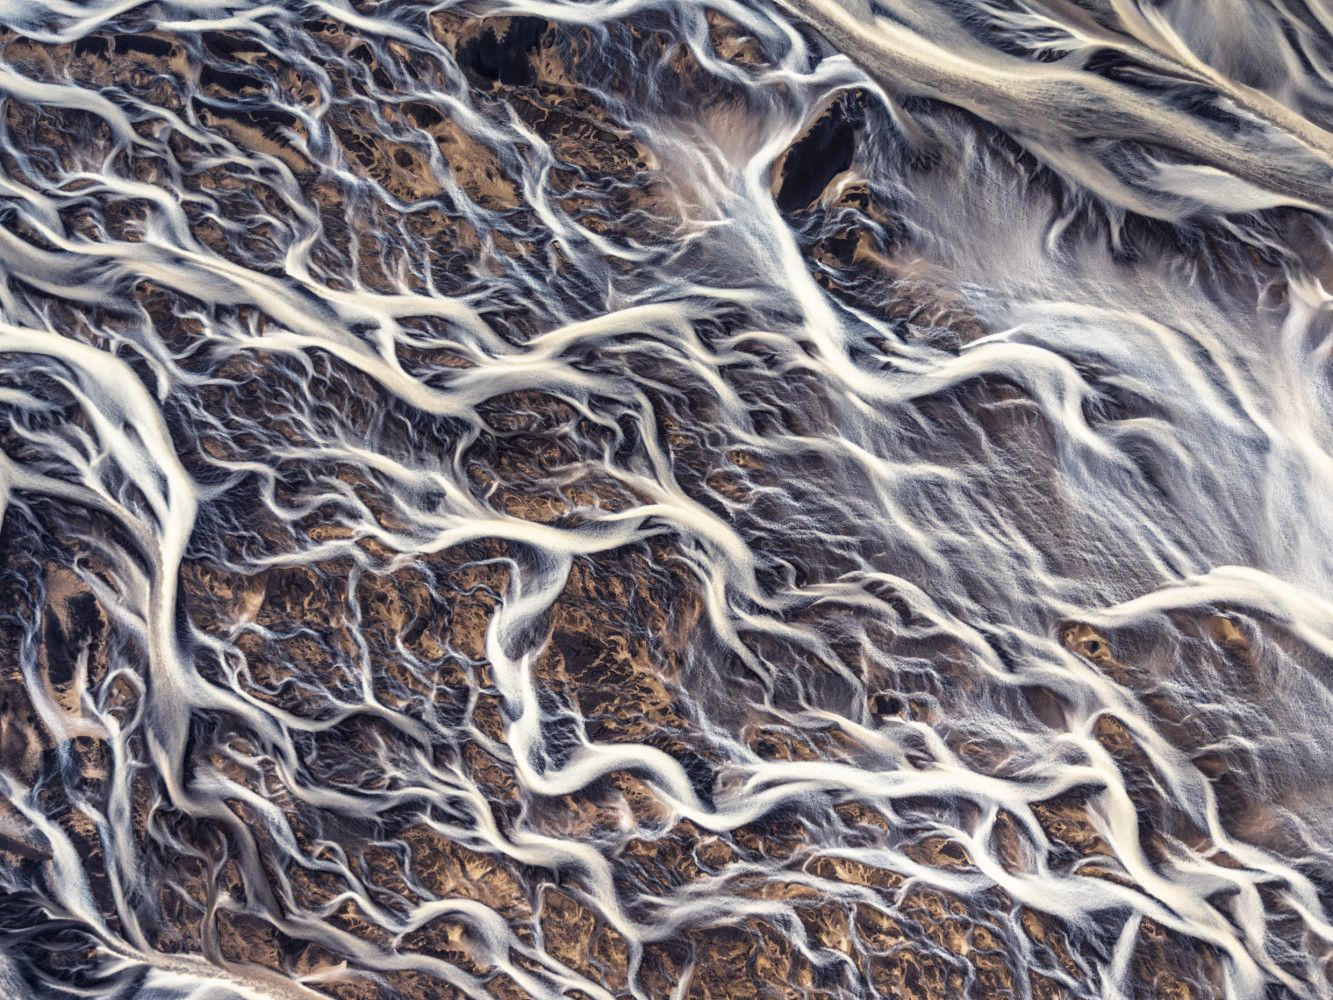 This aerial shot of a glacier river pattern was taken from a Cessna plane in the Southern part of Iceland